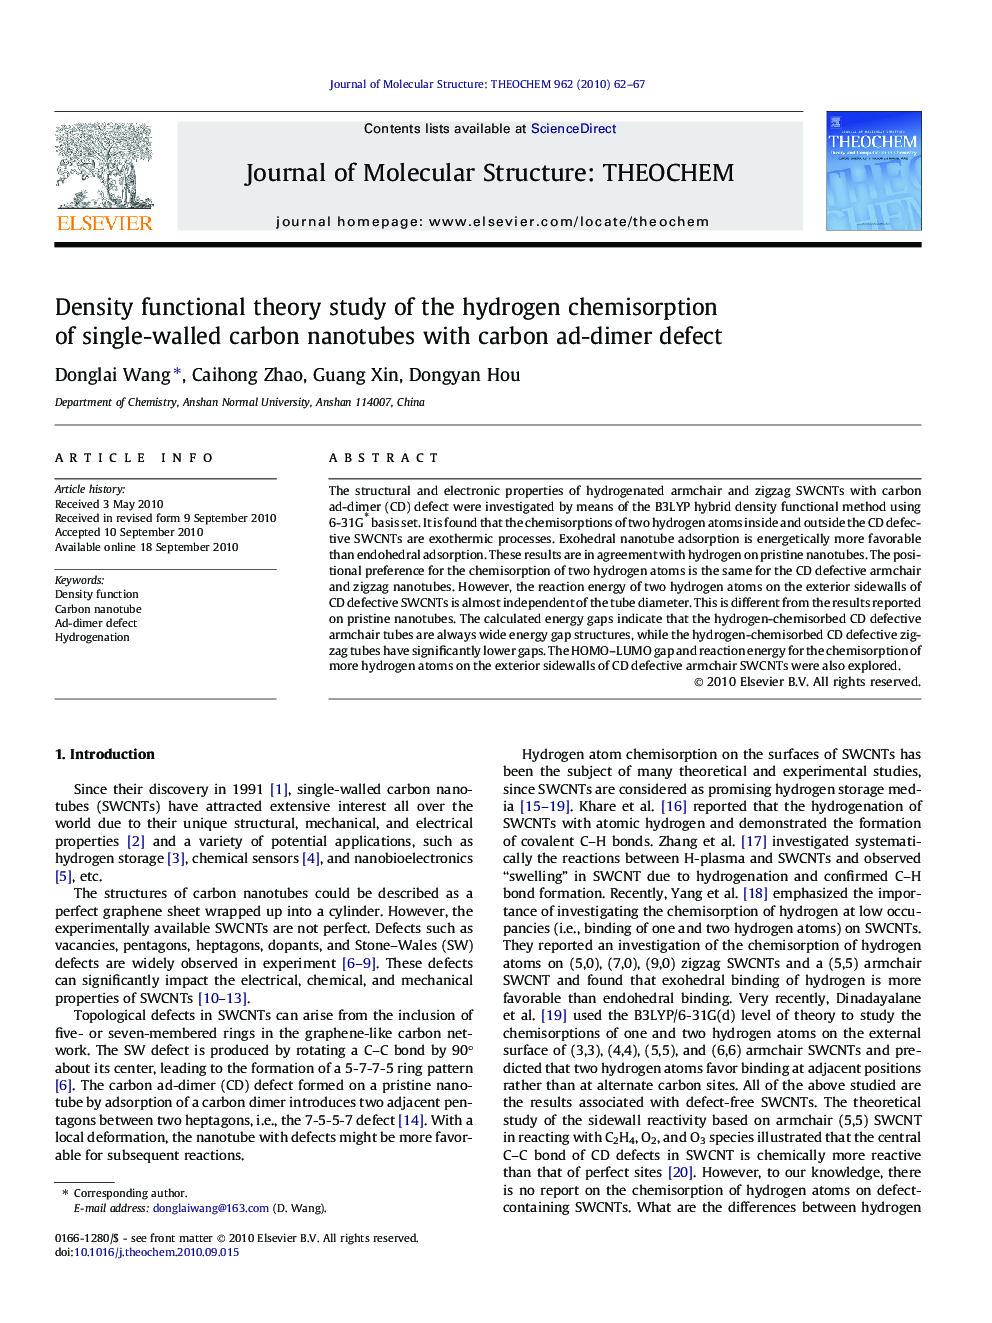 Density functional theory study of the hydrogen chemisorption of single-walled carbon nanotubes with carbon ad-dimer defect